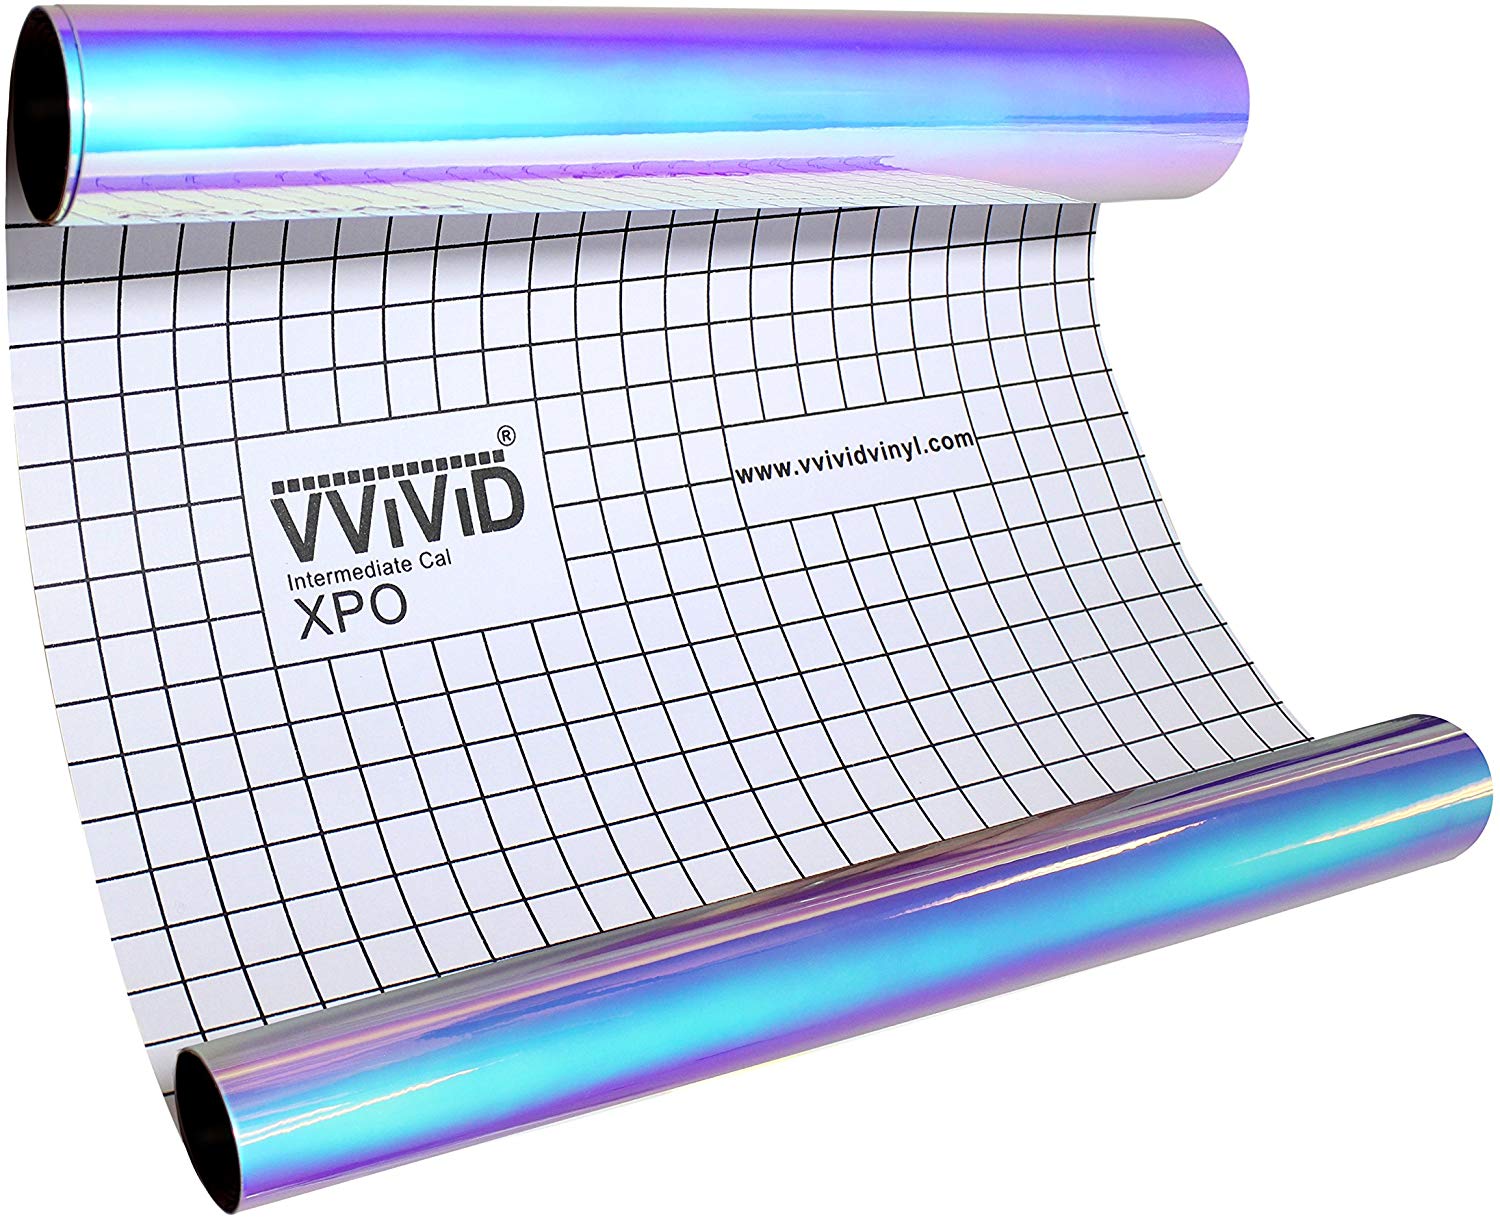 DECO65 High Gloss Unicorn Blue-to-Purple Opal Holographic Adhesive Craft Film - backing